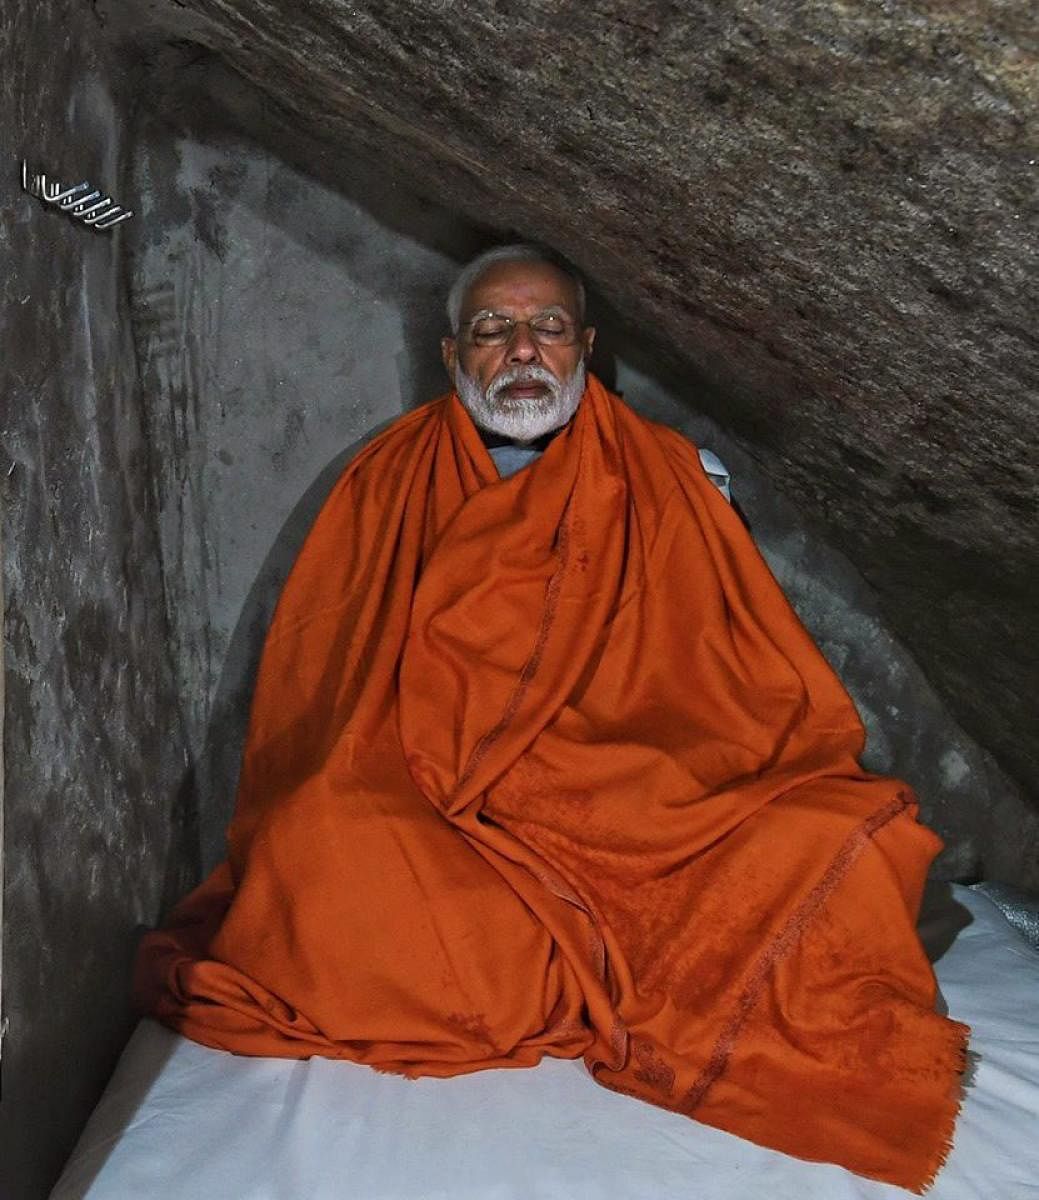 Kedarnath: Prime Minister Narendra Modi meditating in a holy cave near Kedarnath Temple, during his two-day pilgrimage to Himalayan shrines, in Rudraprayag district, Saturday, May 18, 2019. PM Modi will visit Badrinath on Sunday. (Photo PTI)